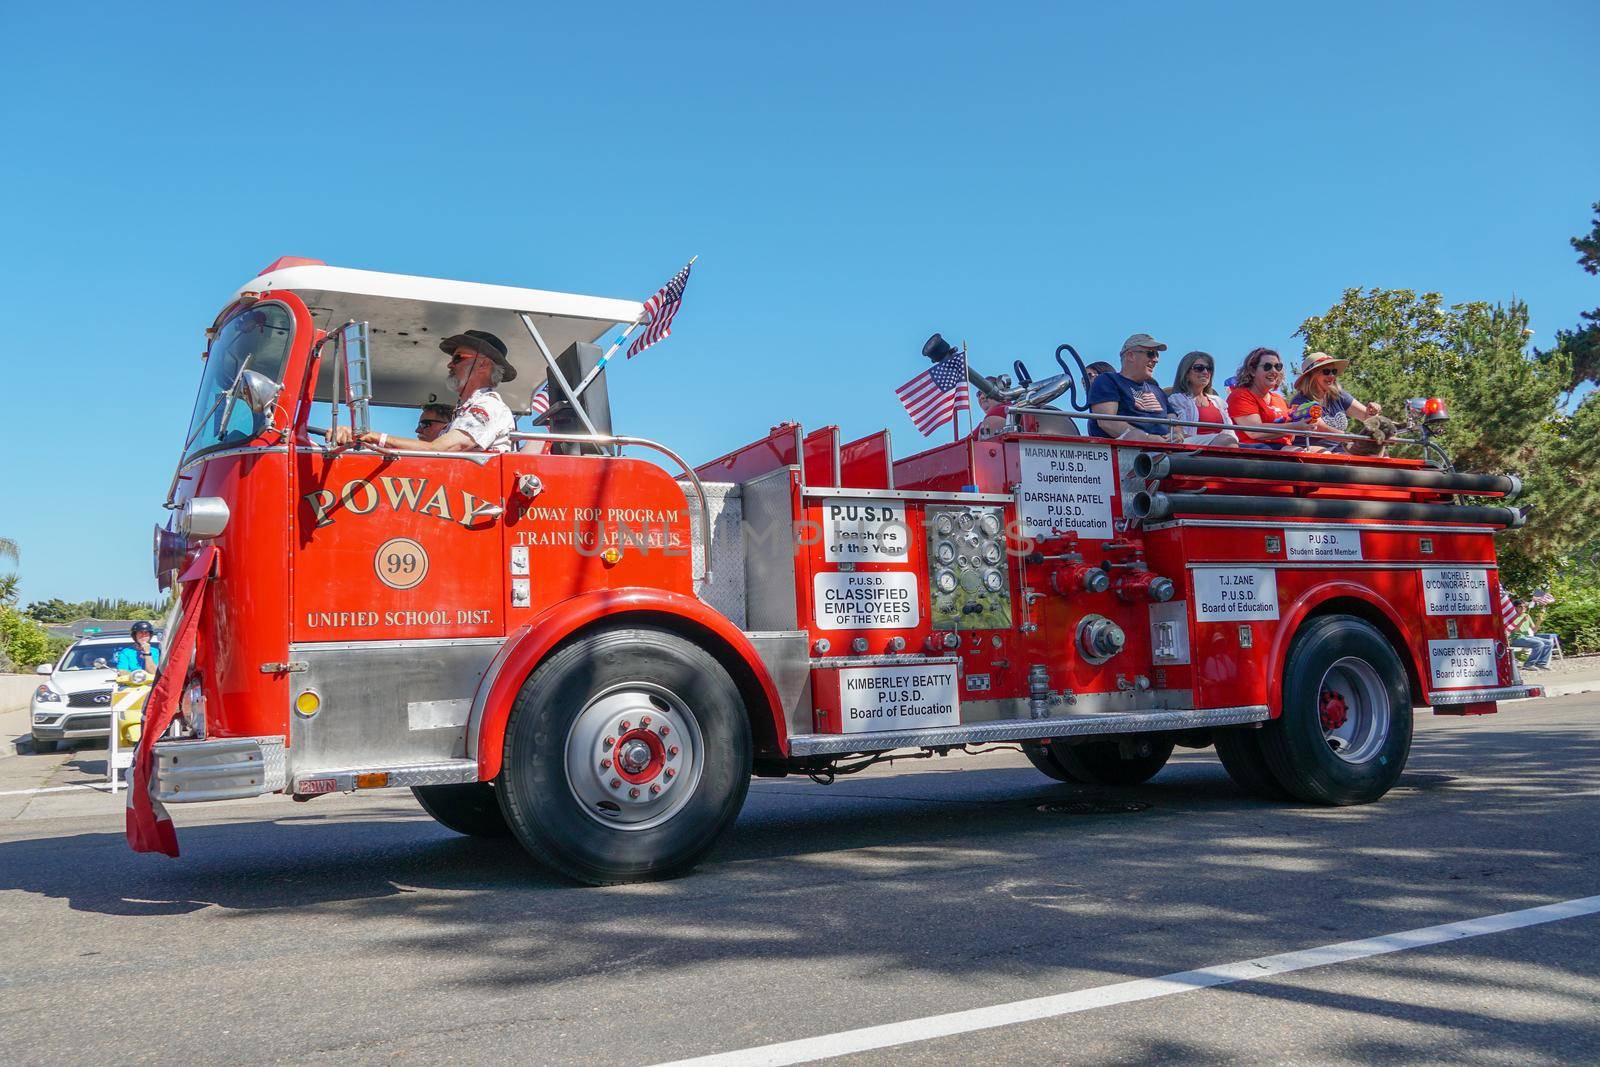 Old Firetruck and people at the July 4th Independence Day Parade in Rancho Bernardo, San Diego by Bonandbon